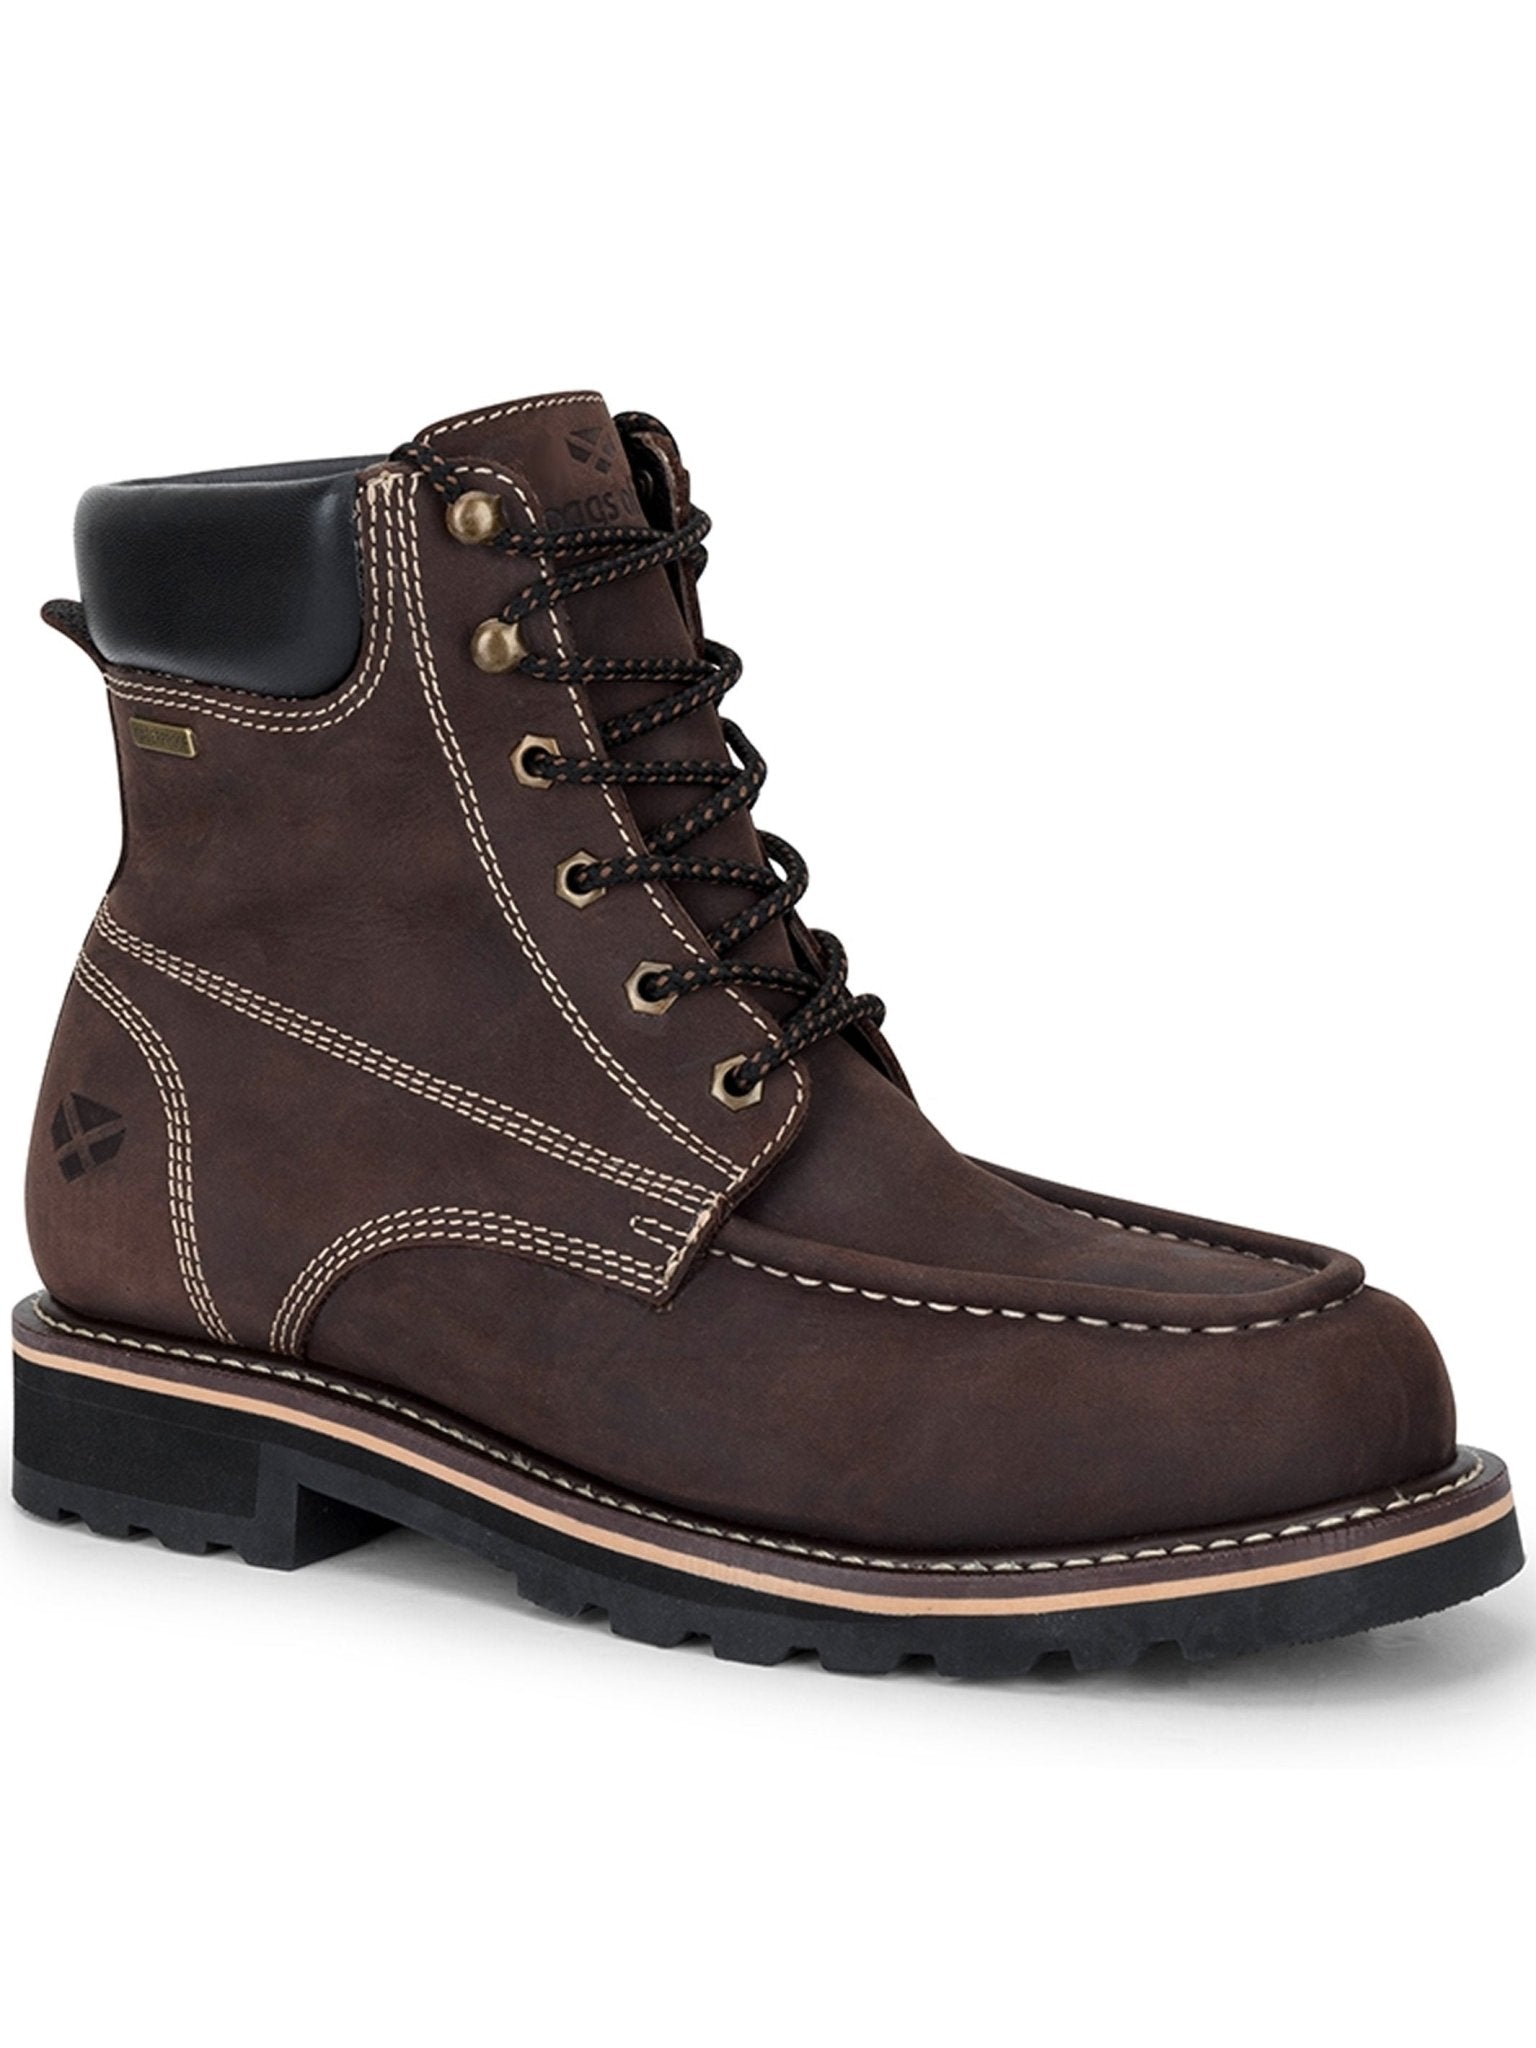 Hoggs of Fife Hoggs of Fife - Selkirk Moc toe - Leather Waterproof mens boots Shoes